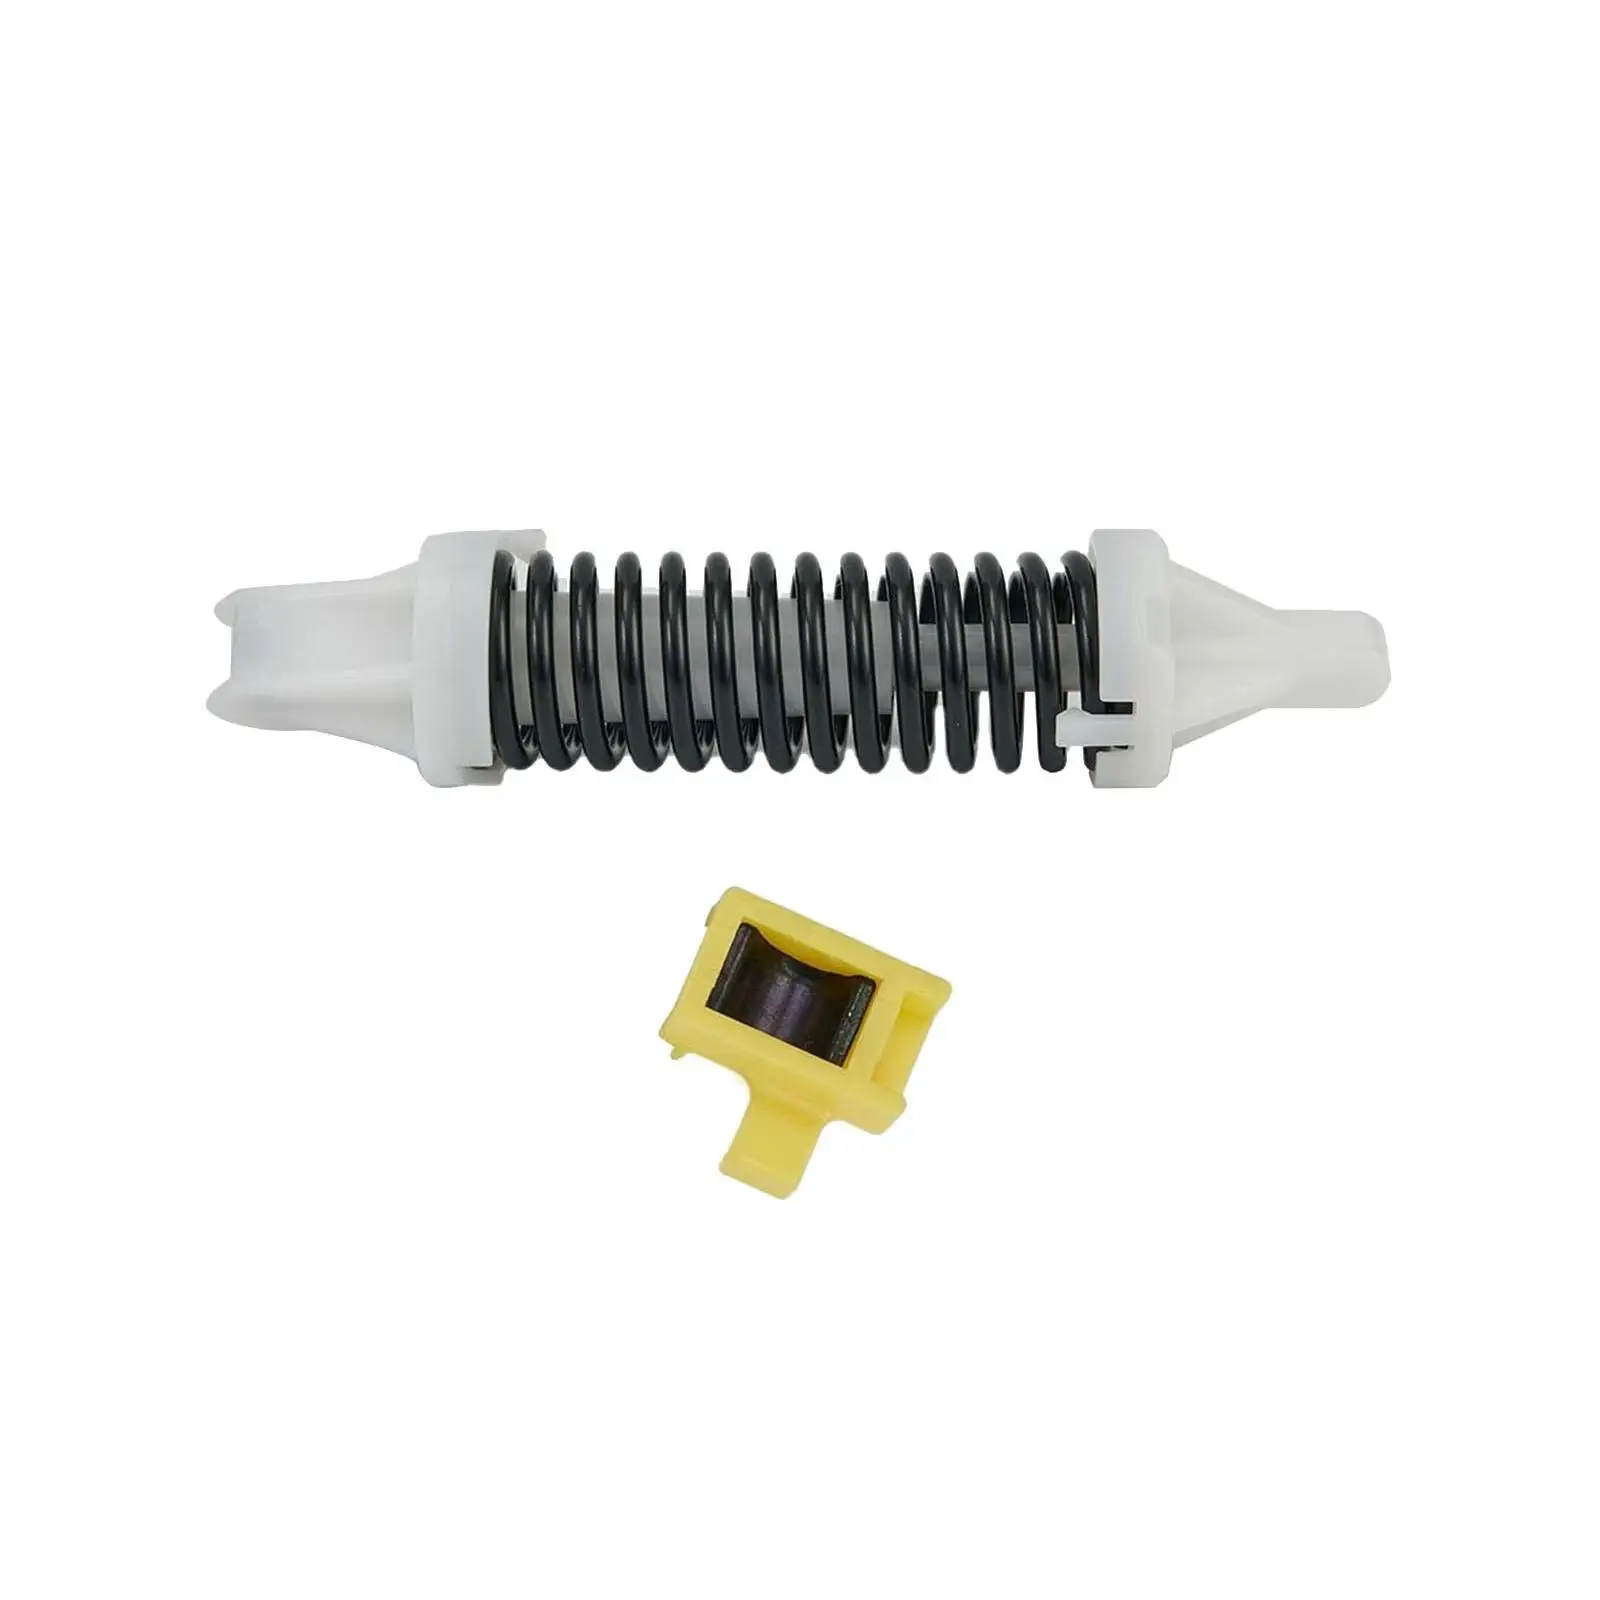 Clutch Pedal Return Spring Replace High Quality 12800290 93183937 9006348 for Vauxhall Opel Signum 2003-2008 Accessories